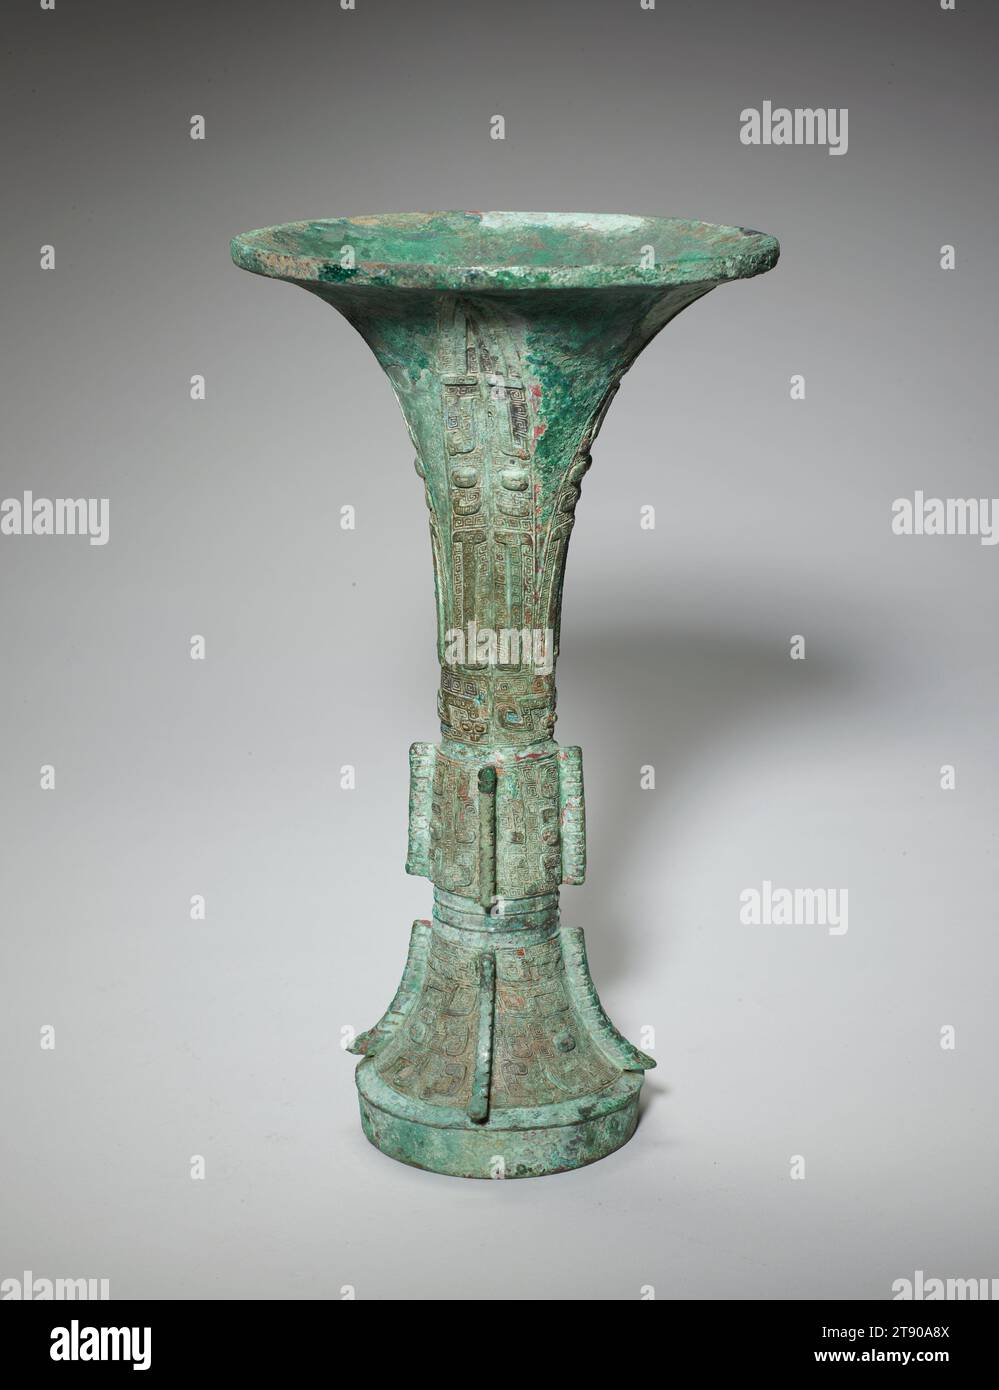 Gu wine vessel, 12th-11th century BCE, 11 3/4 × 6 5/8 in., 3.3 lb. (29.85 × 16.83 cm, 1.5 kg), Bronze, China, 12th-11th century BCE, The gu is a tall wine beaker with an unusually taut and graceful silhouette—its trumpet-shaped top tapers to a slim center section before widening again to a slightly flared base. Archaeological evidence reveals that bronze gu first appeared during the Erligang period (c. 1500–1300 BCE) of the Shang dynasty. The gu enjoyed its greatest popularity during the Shang dynasty (c. 1600–1046 BCE), but became less popular in the early Western Zhou Stock Photo